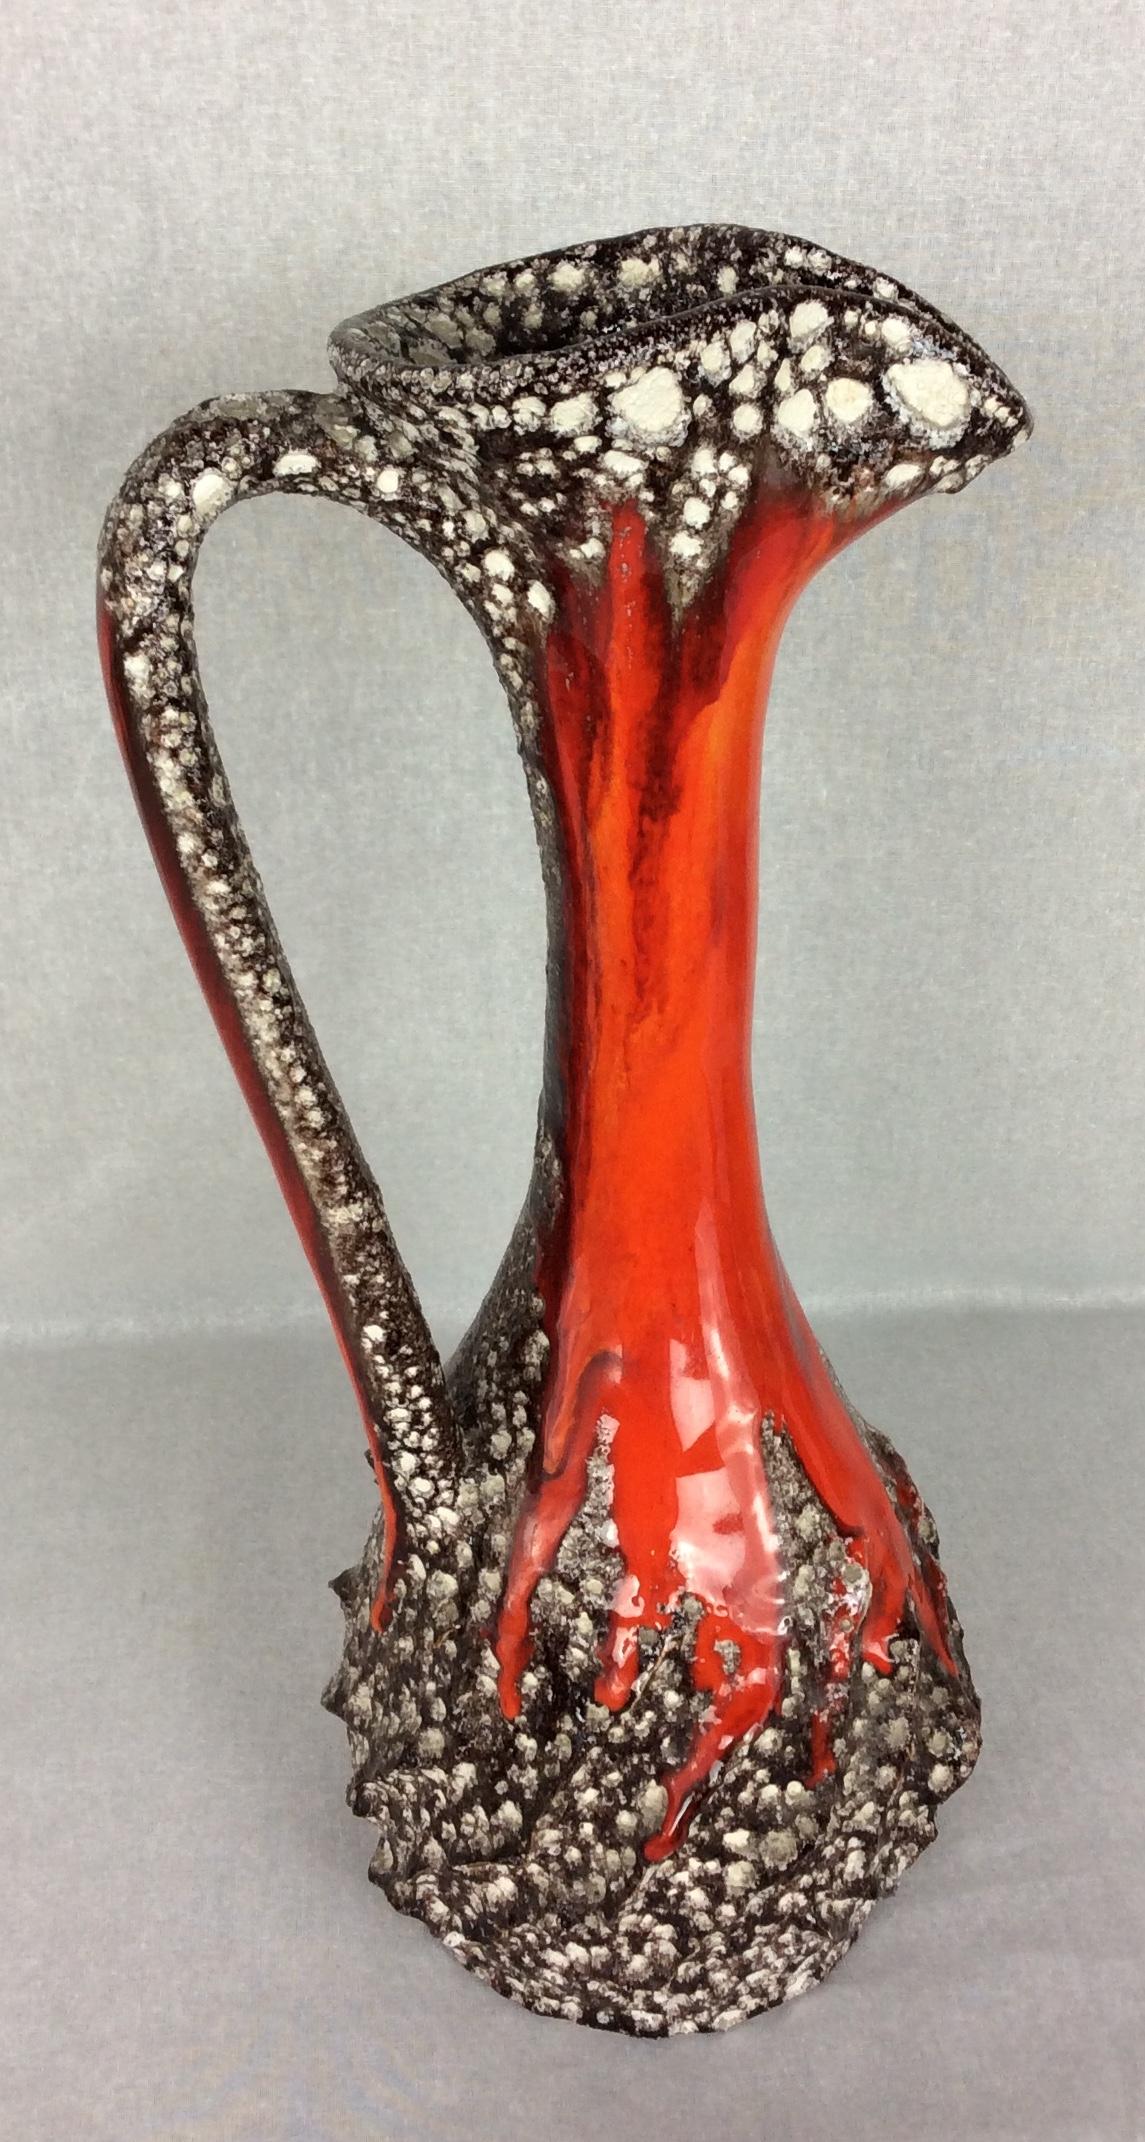 This large dazzling mid-century glazed ceramic pitcher vase was designed and crafted by Charles Cart.  This well-known listed ceramic artist called it Cyclope because of the large volcanic dimples created during the firing of the pottery which